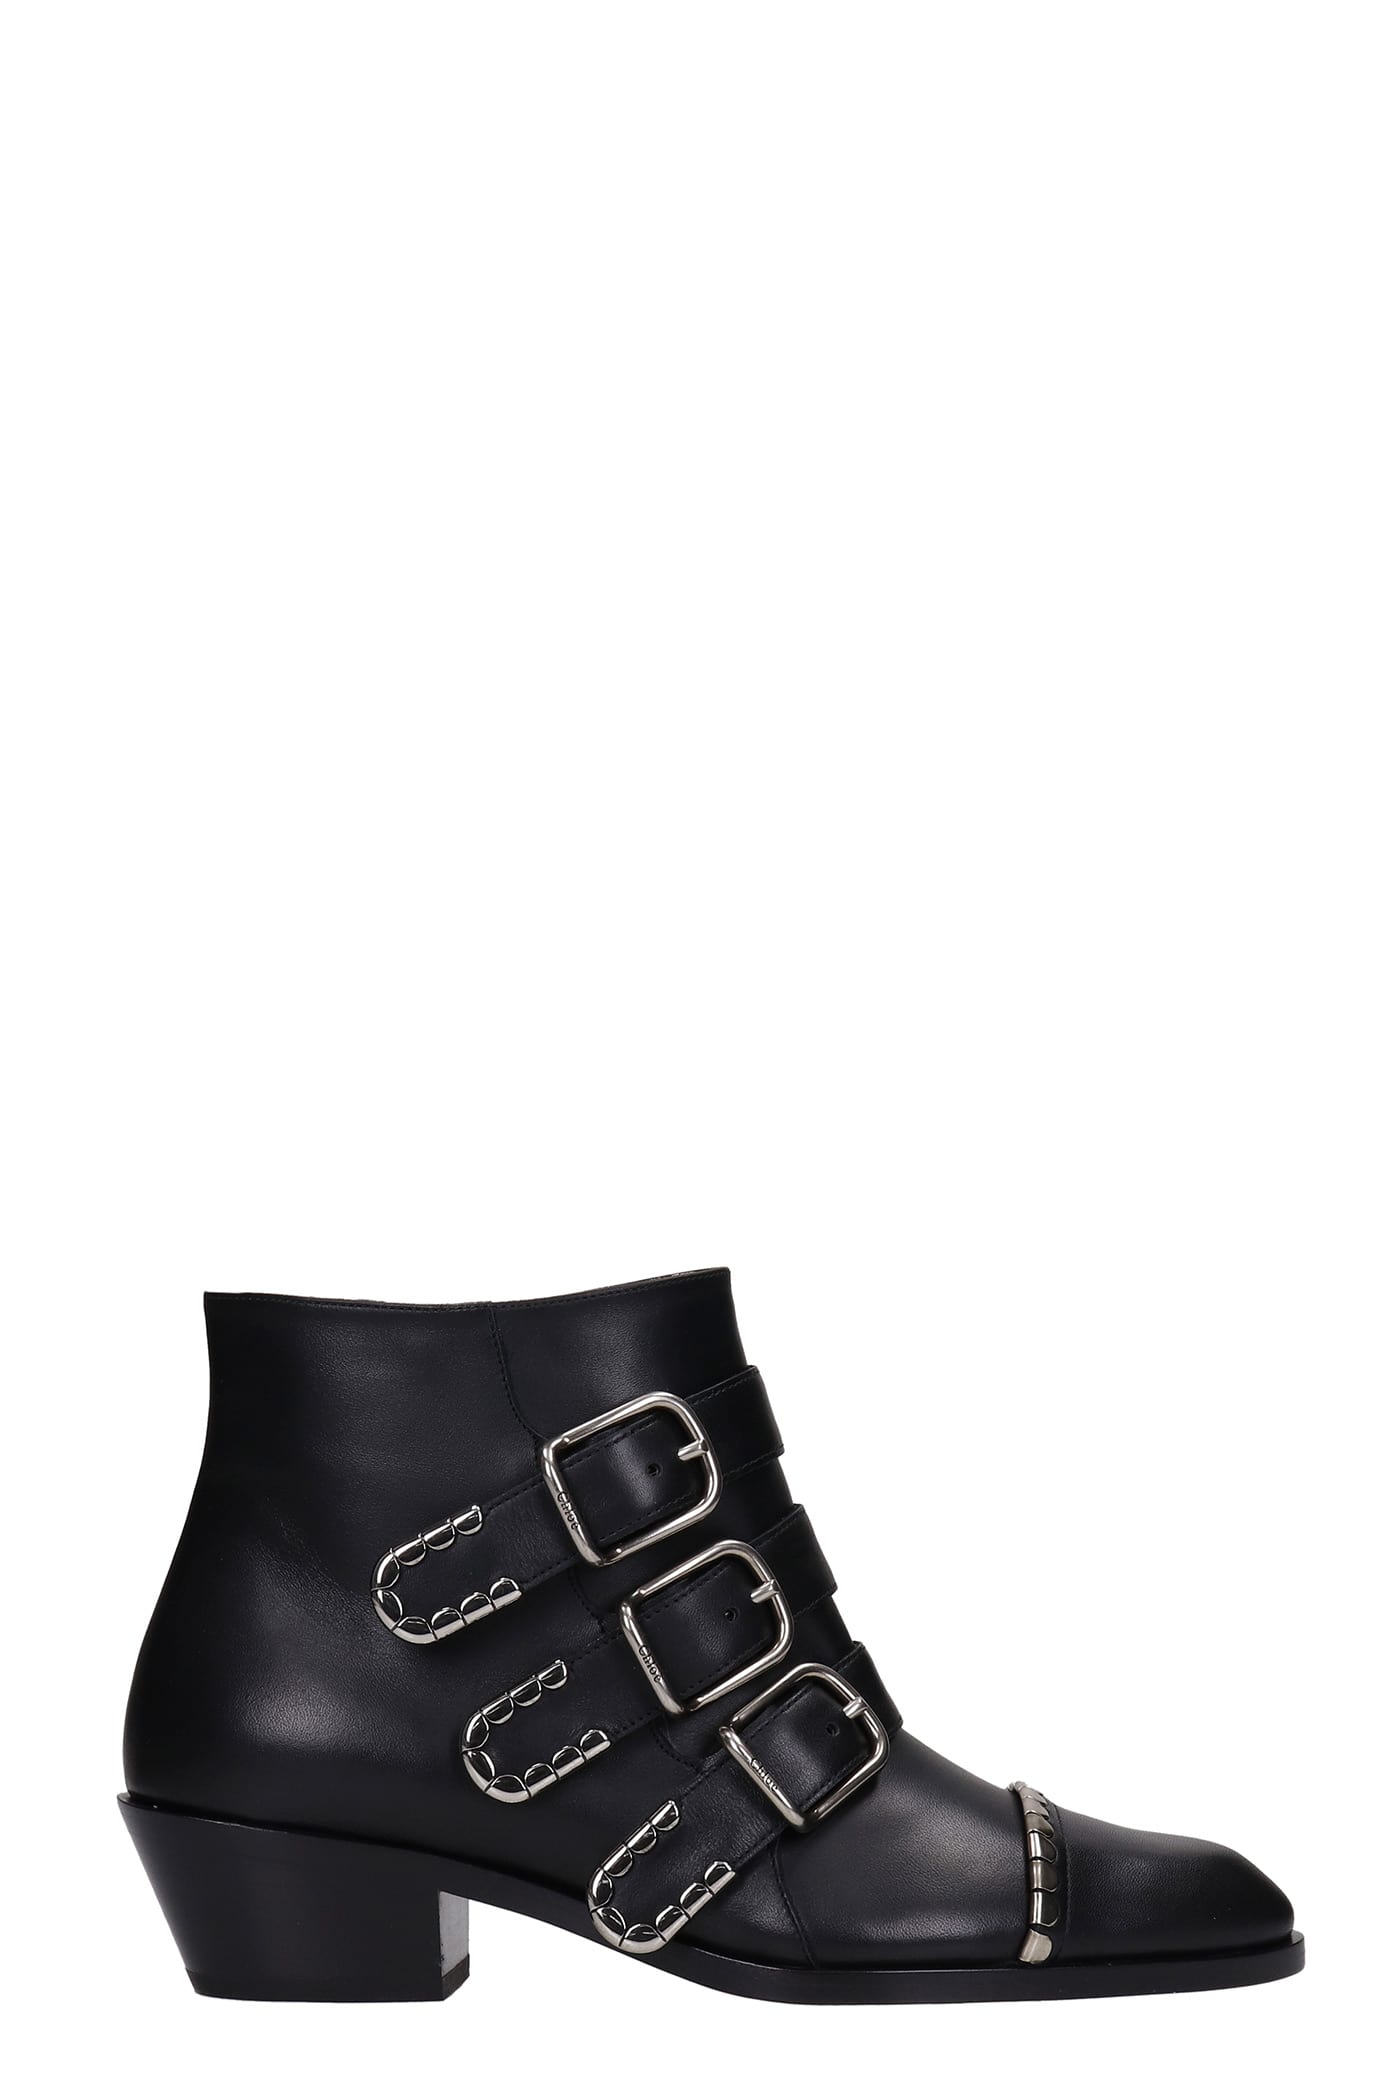 Chloé Idol Low Heels Ankle Boots In Black Leather